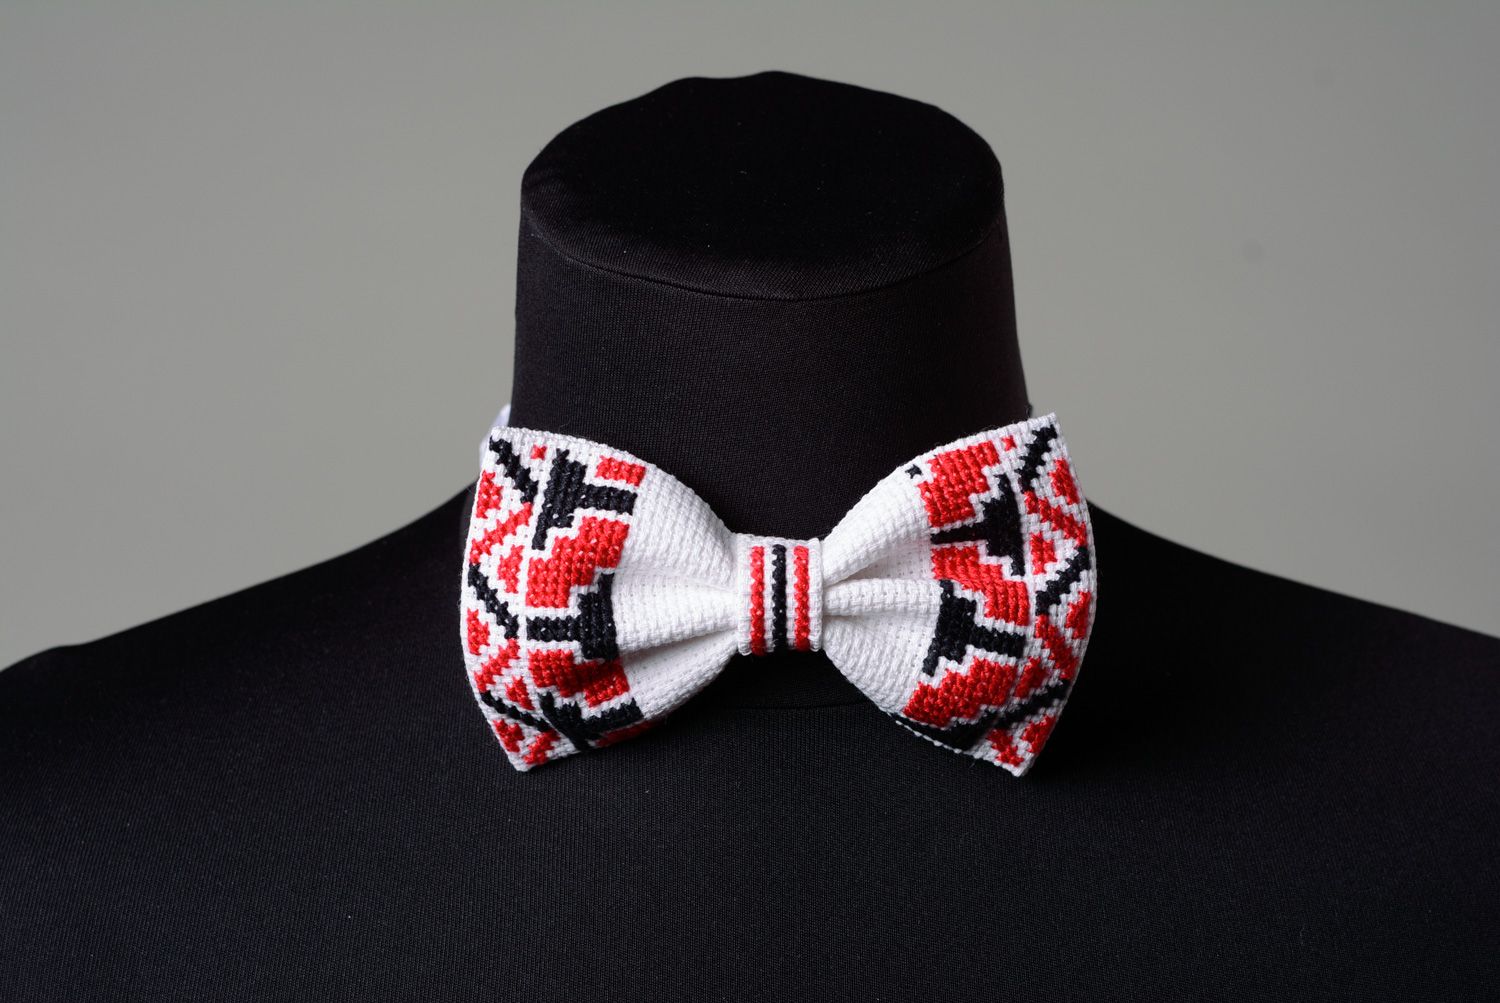 Handmade designer bow tie with cross stitch embroidery photo 1